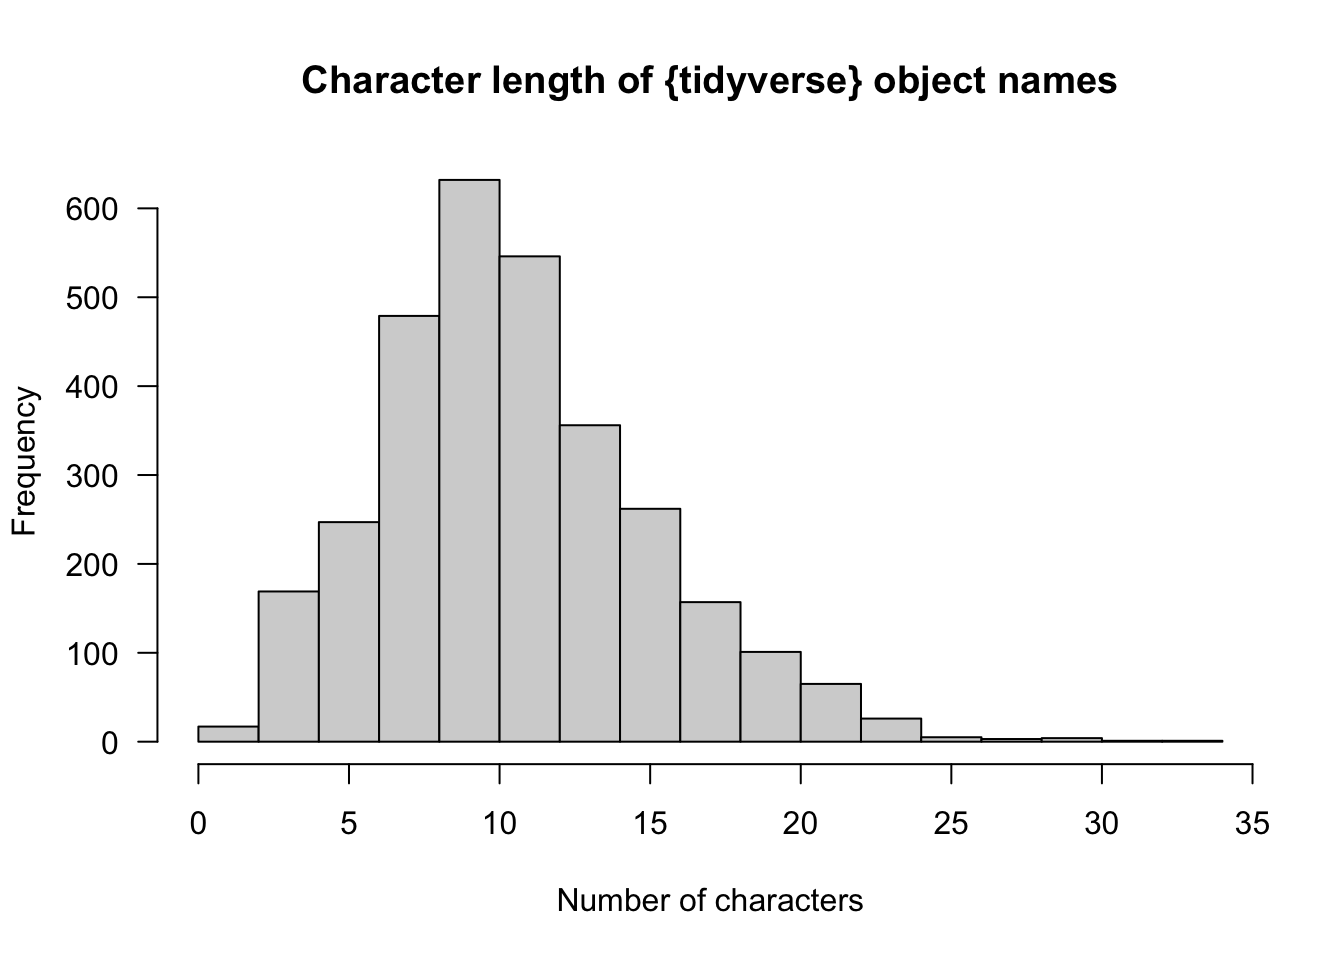 Histogram of character lengths for tidyverse object names. It's fairly normal around a bin of 8 to 10 characters, which has a peak frequency of over 600, plus there's a tail stretching out to over 30 characters.